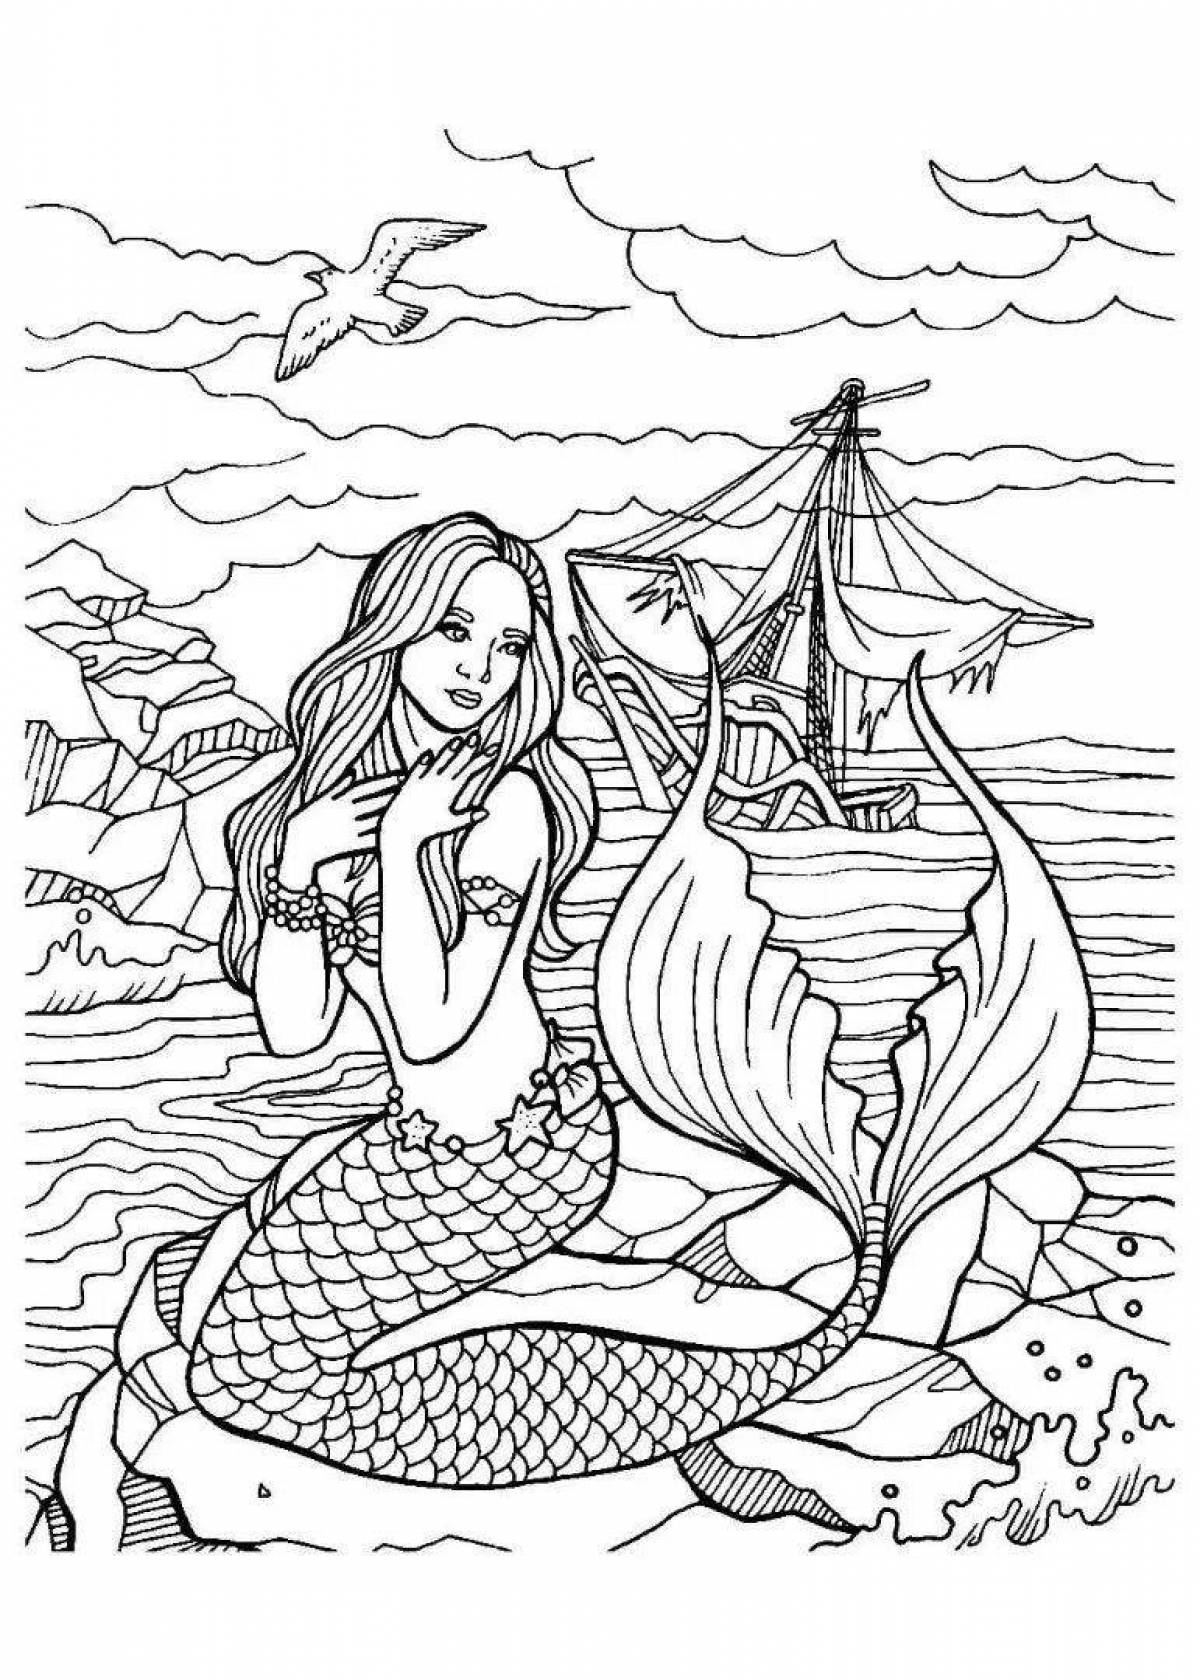 Fairytale coloring drawing of a mermaid